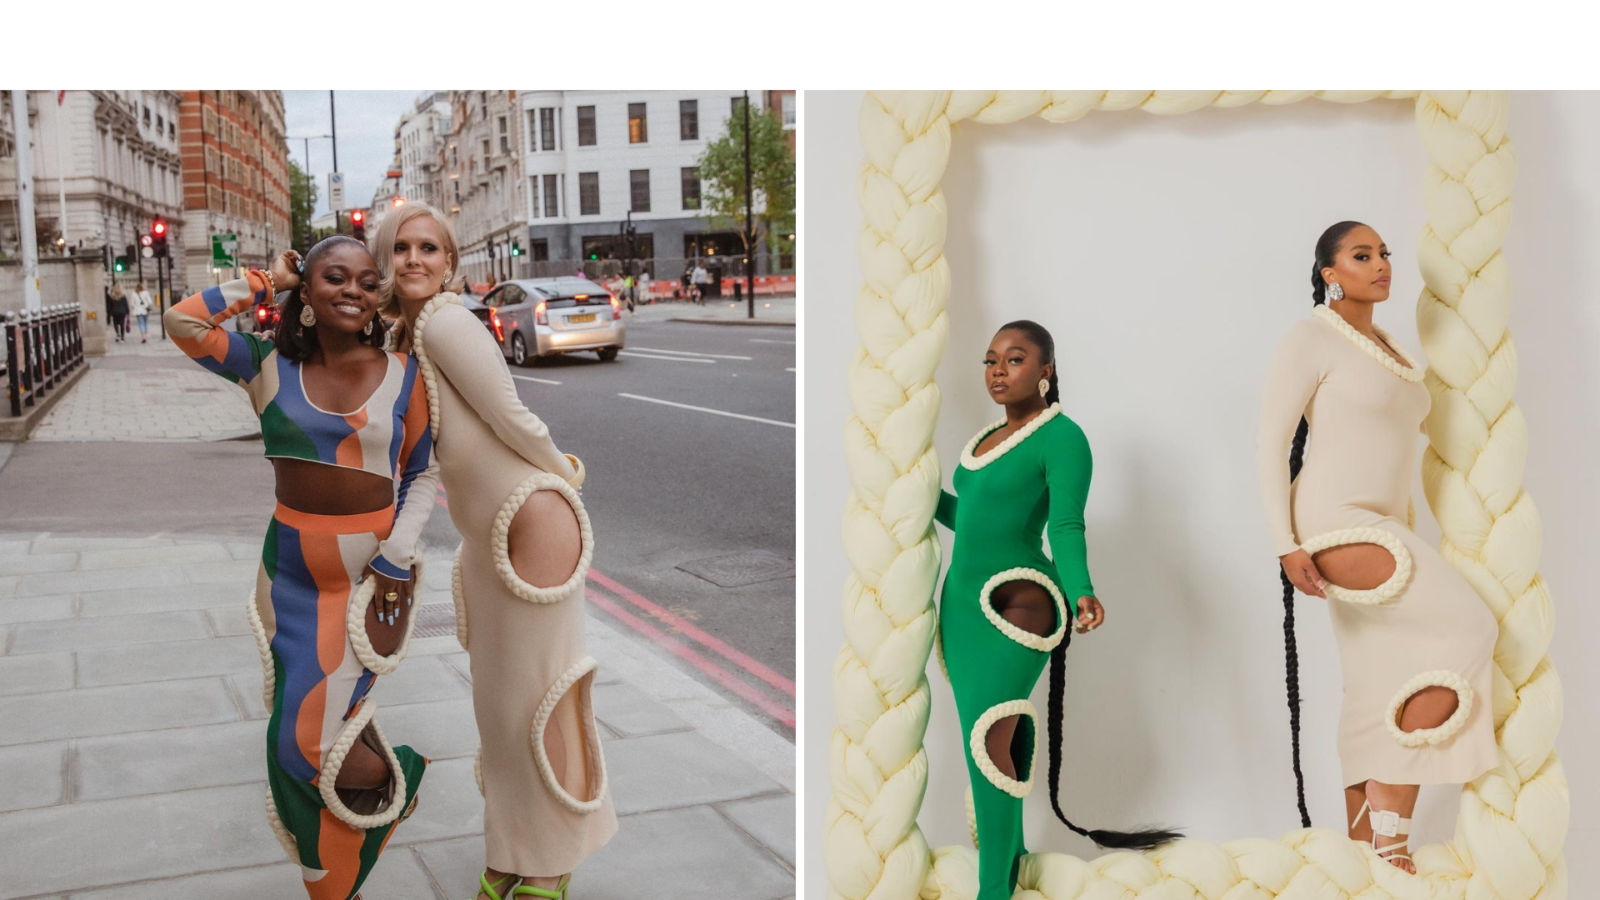 Bring out your scissors as dresses with massive holes catch fashion’s fancy